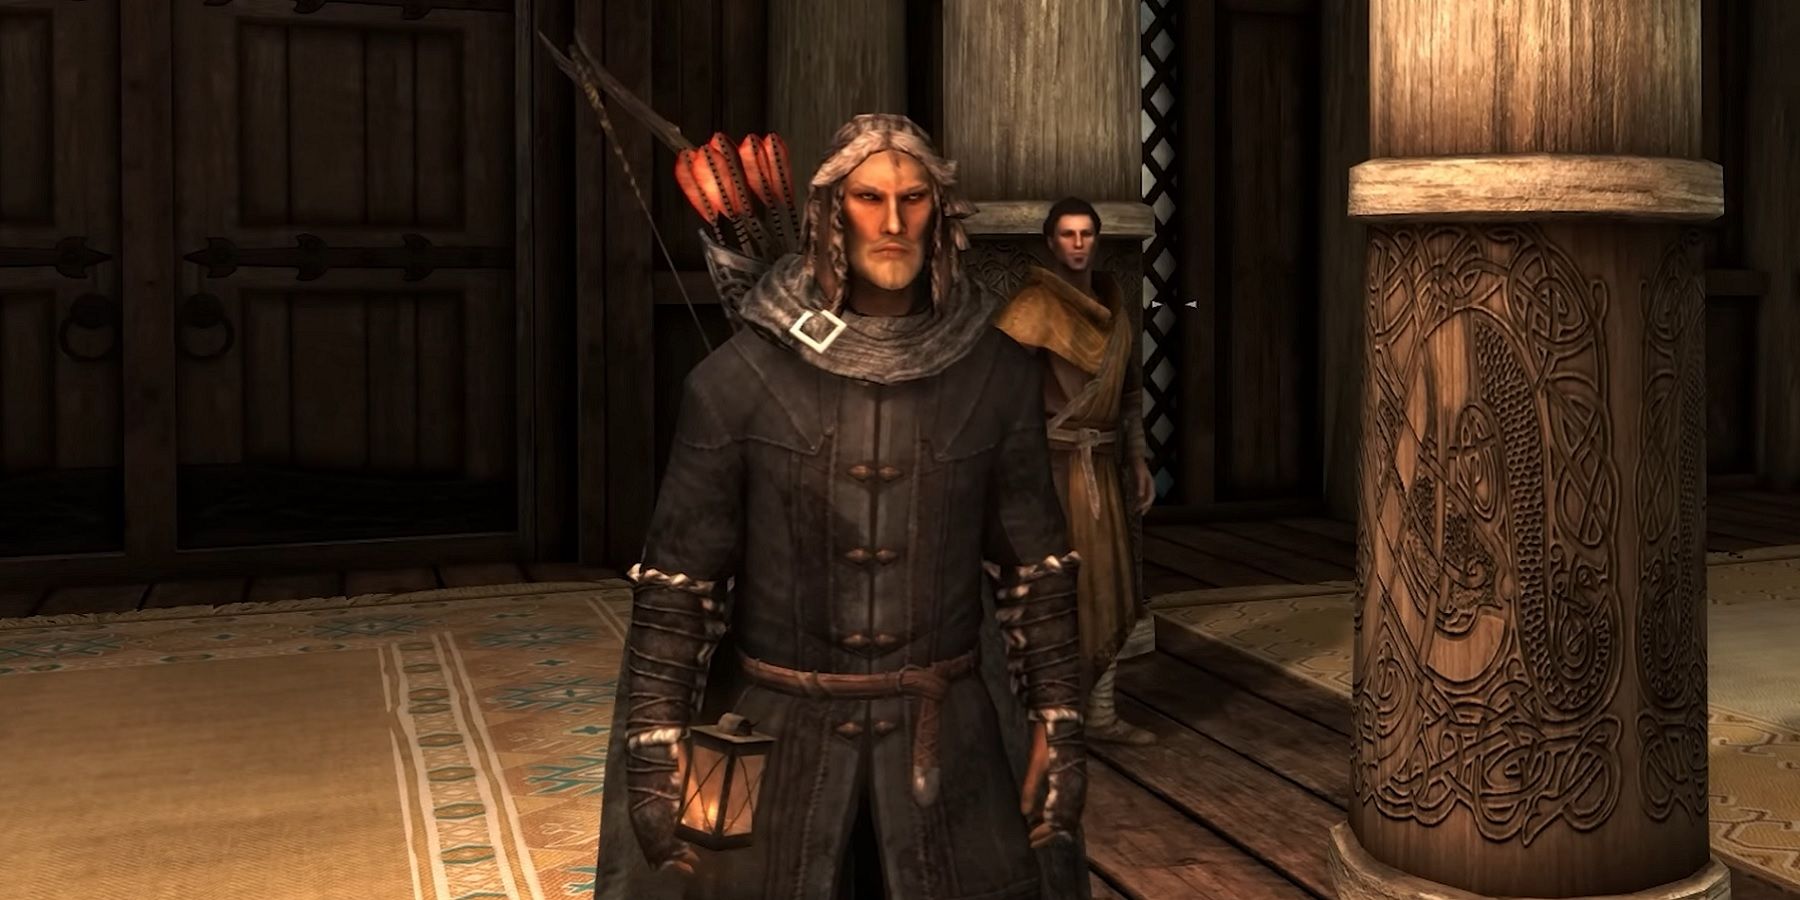 Image from Skyrim showing the player with an arrow quiver and bow.